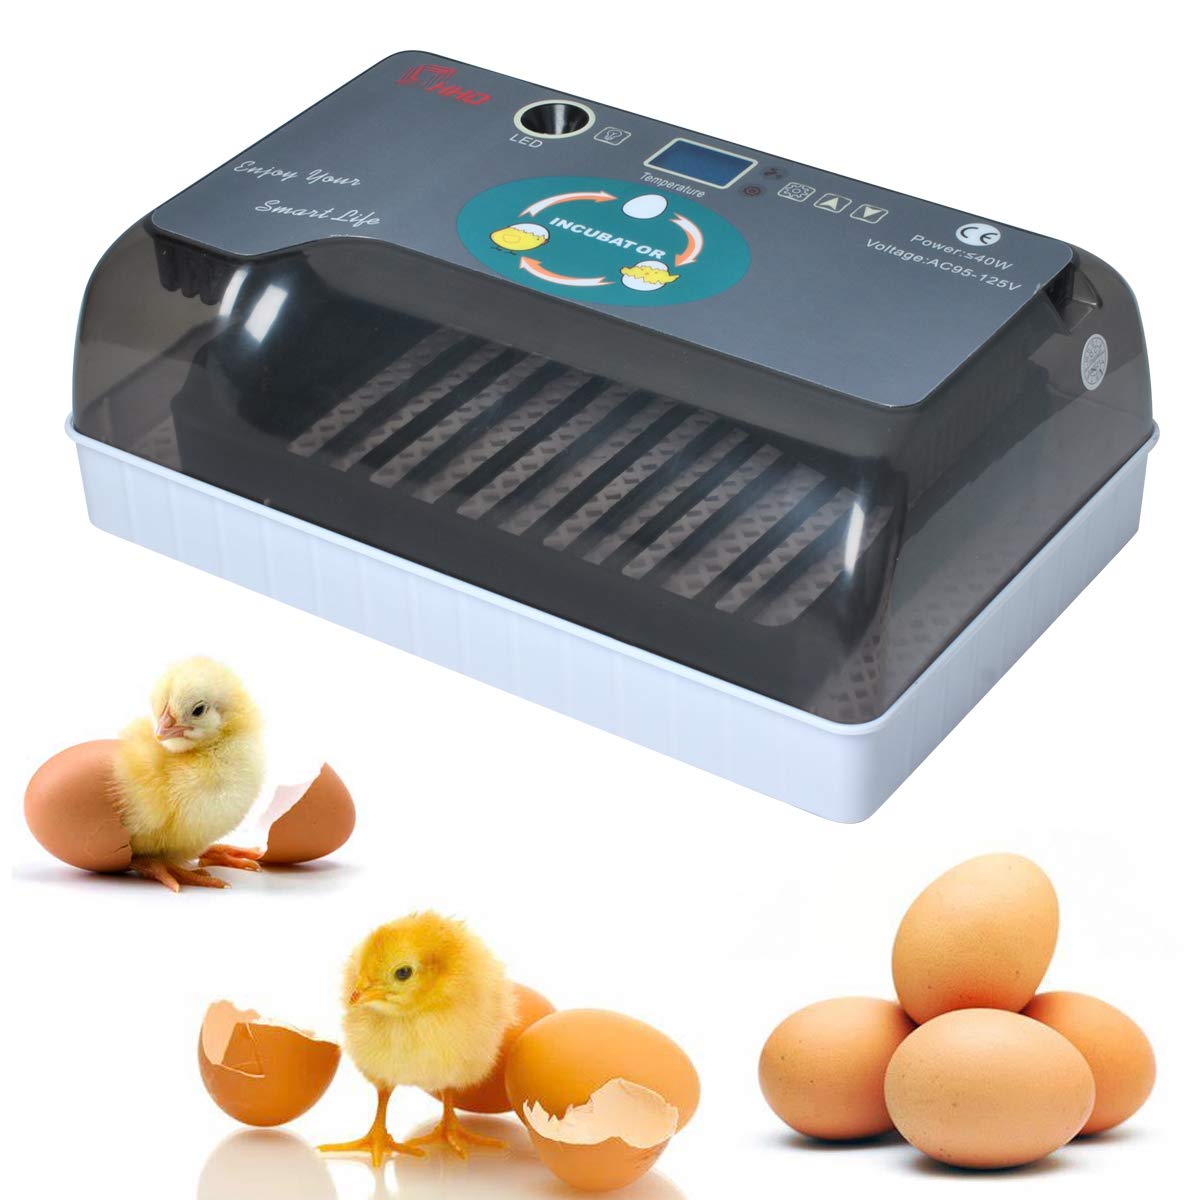 Smart Egg Incubator Clear View, Automatic Egg Turner, Temperature Humidity Control, Egg Candler, Poultry Egg Incubator for Hatching 12-15 Chicken Eggs, 35 Quail Eggs, 9 Duck Eggs, Turkey Goose Birds Featured Image